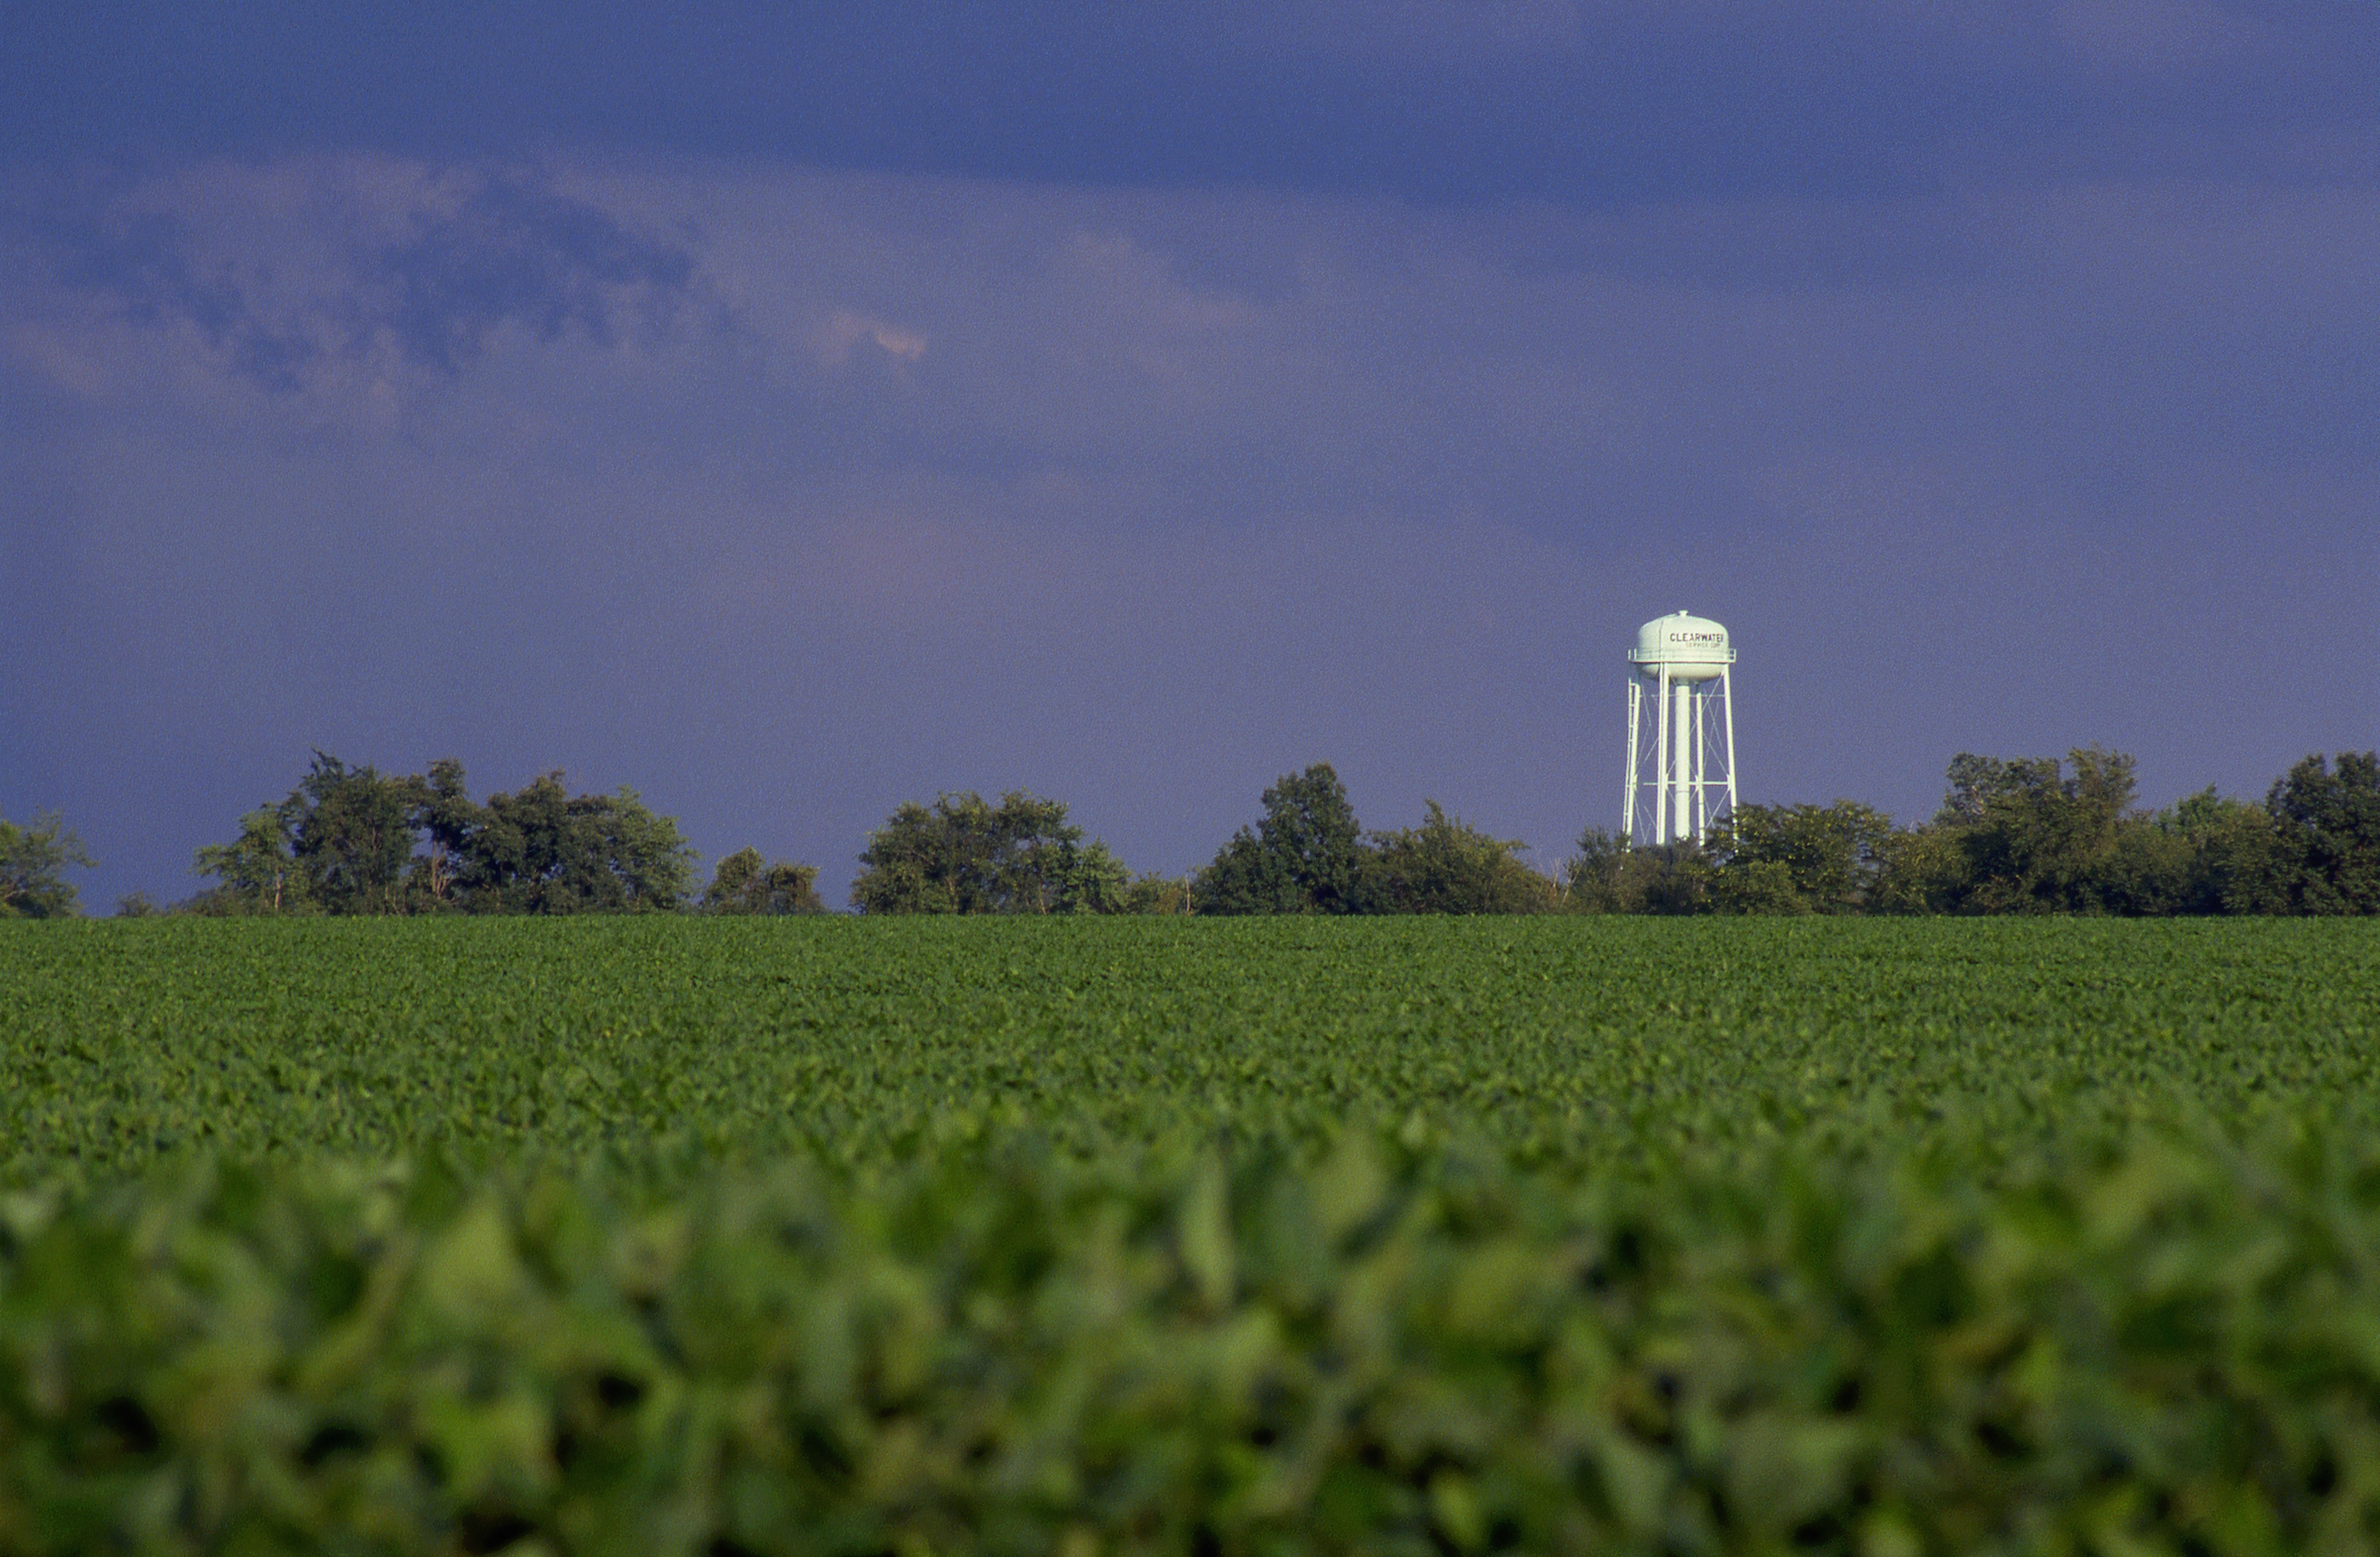 Soybean field and Water tower, Illinois